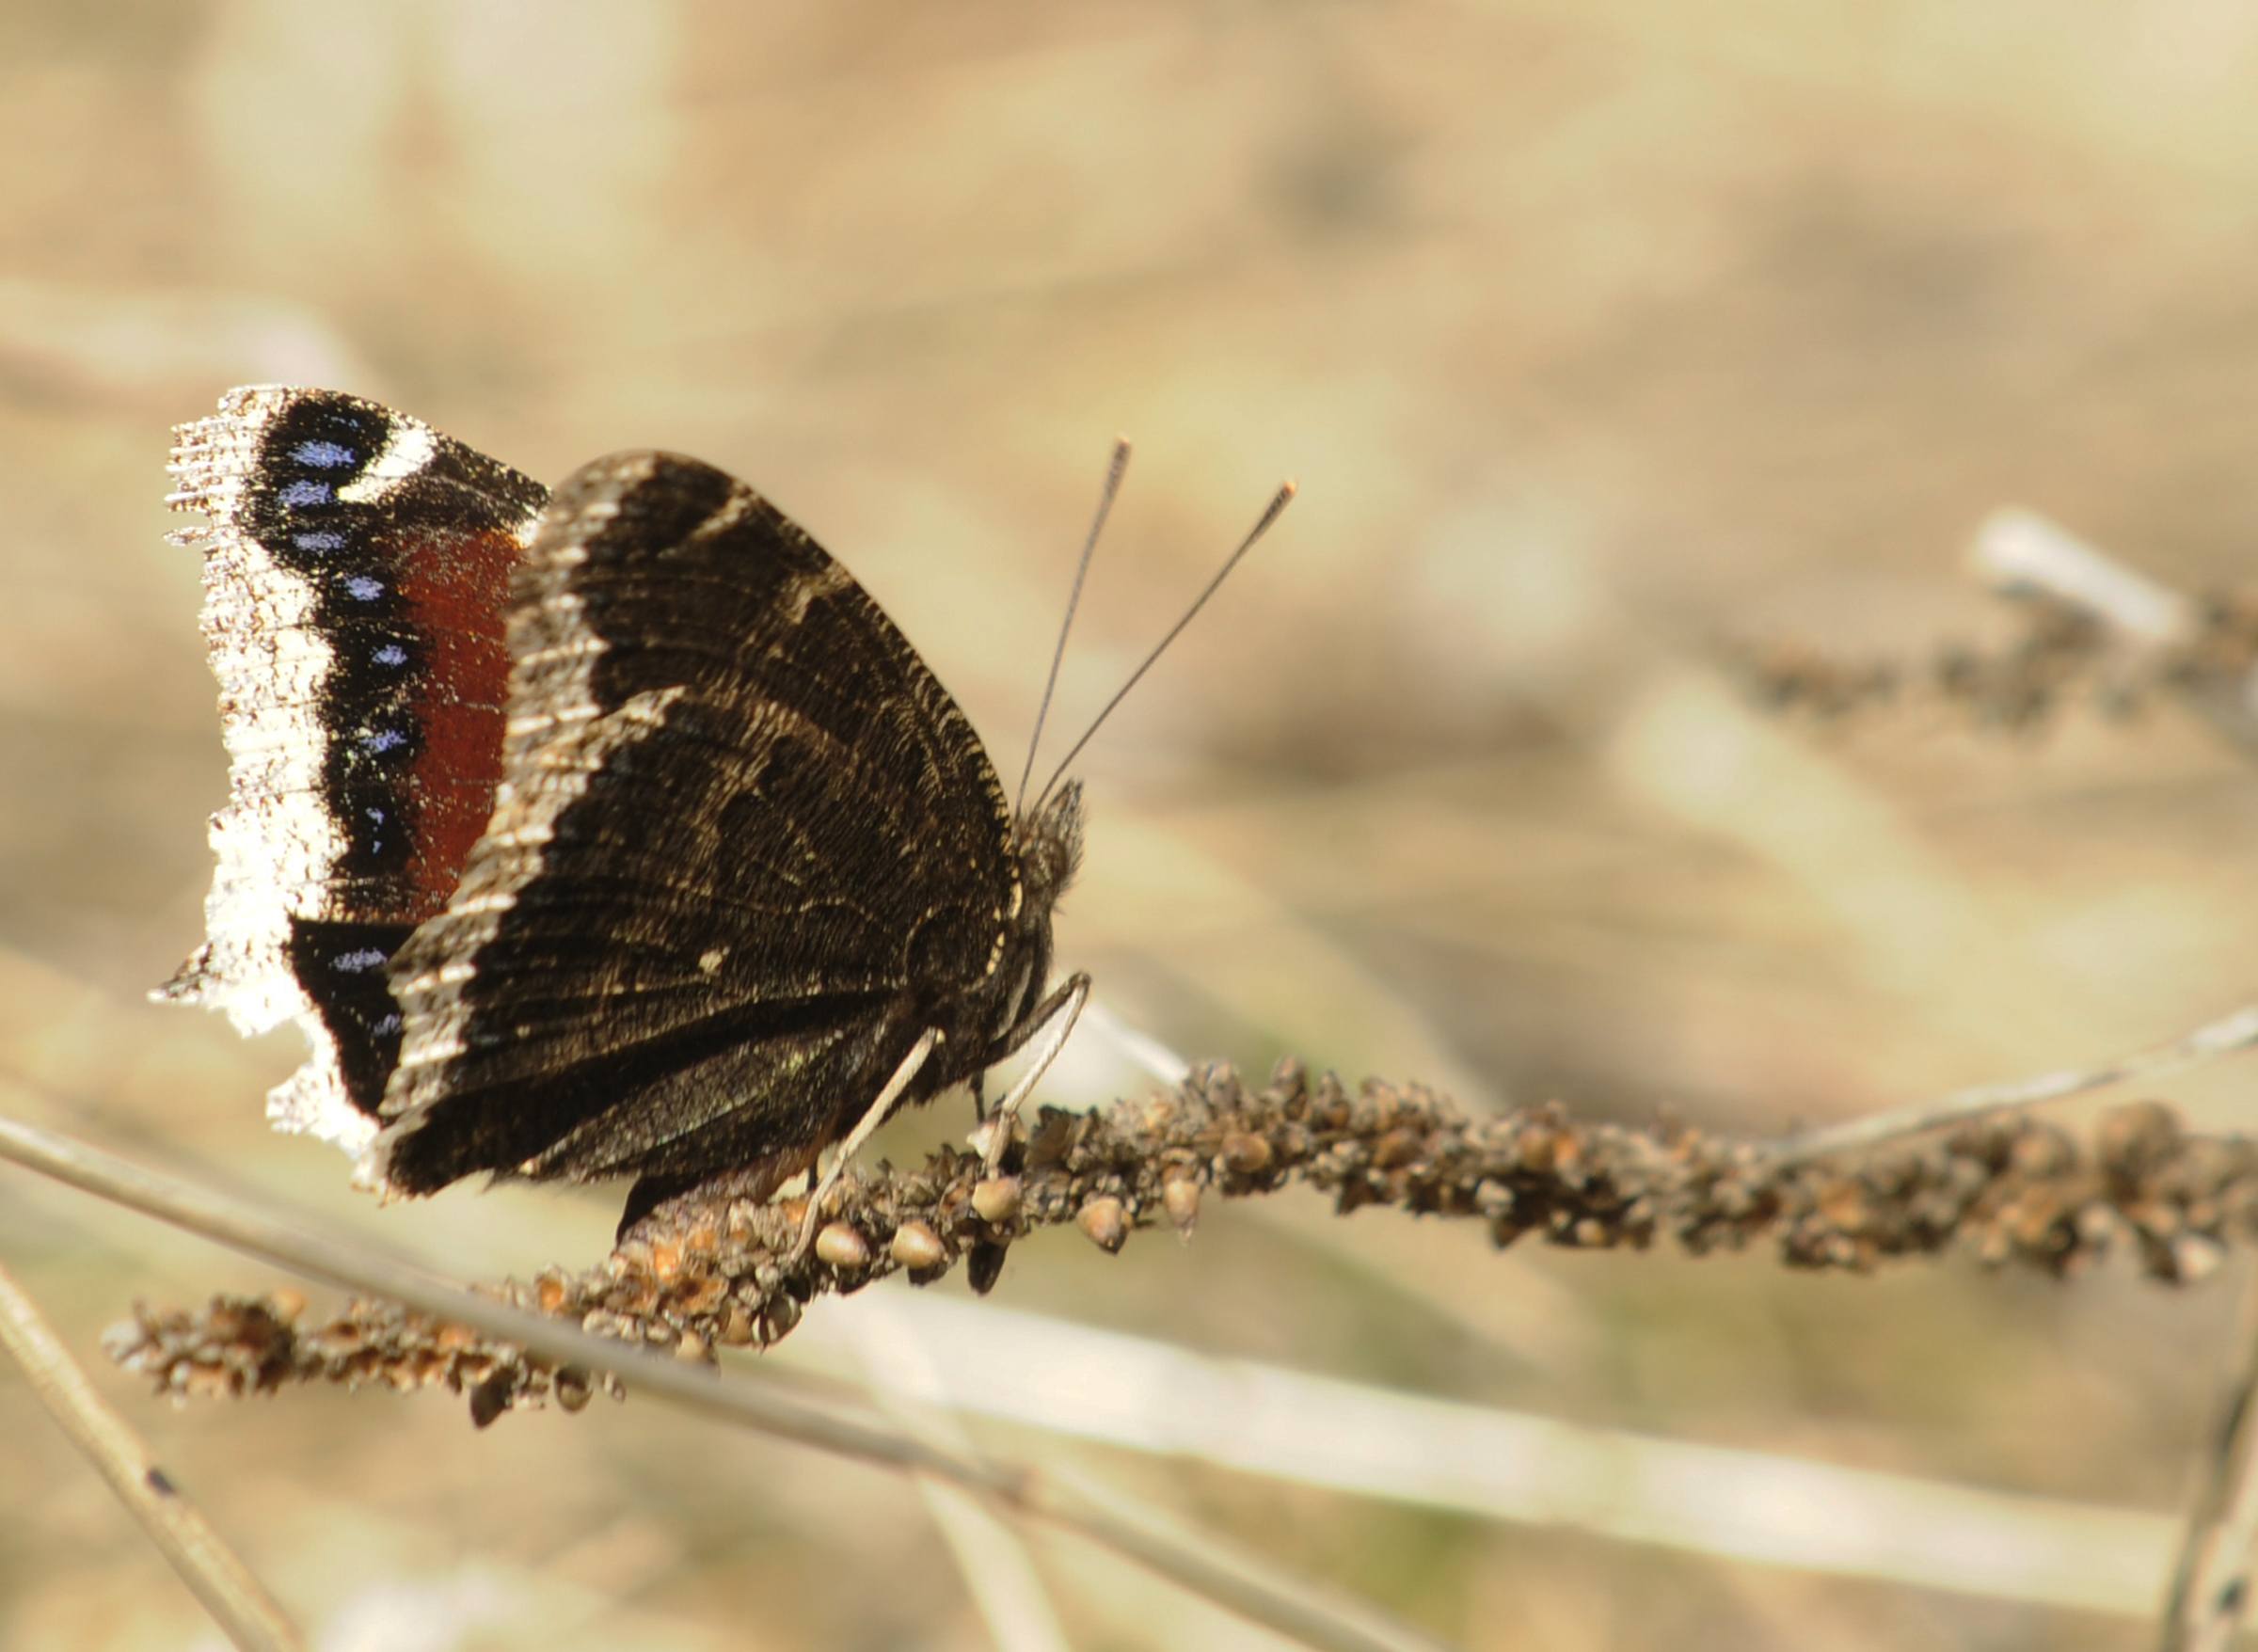 SPRING- A small butterfly found its way this past weekend to Red Deer despite the snow covered ground